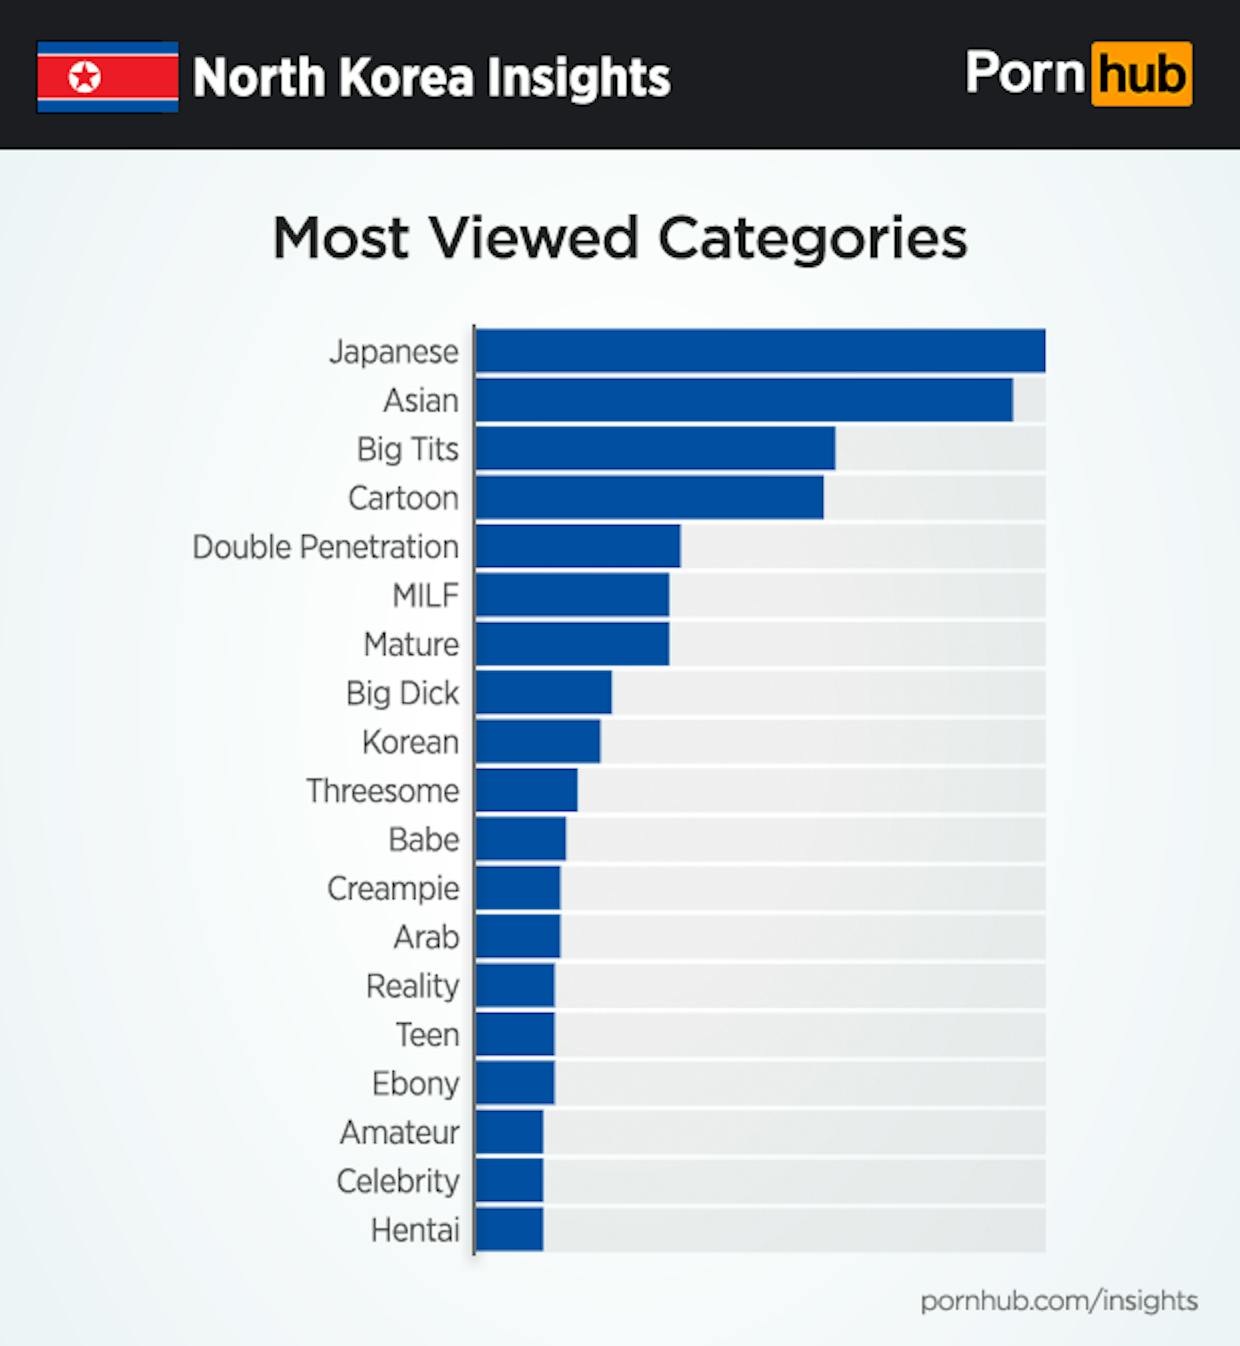 North Korean Pornography - Pornhub Just Released New Data on What North Koreans Watch ...